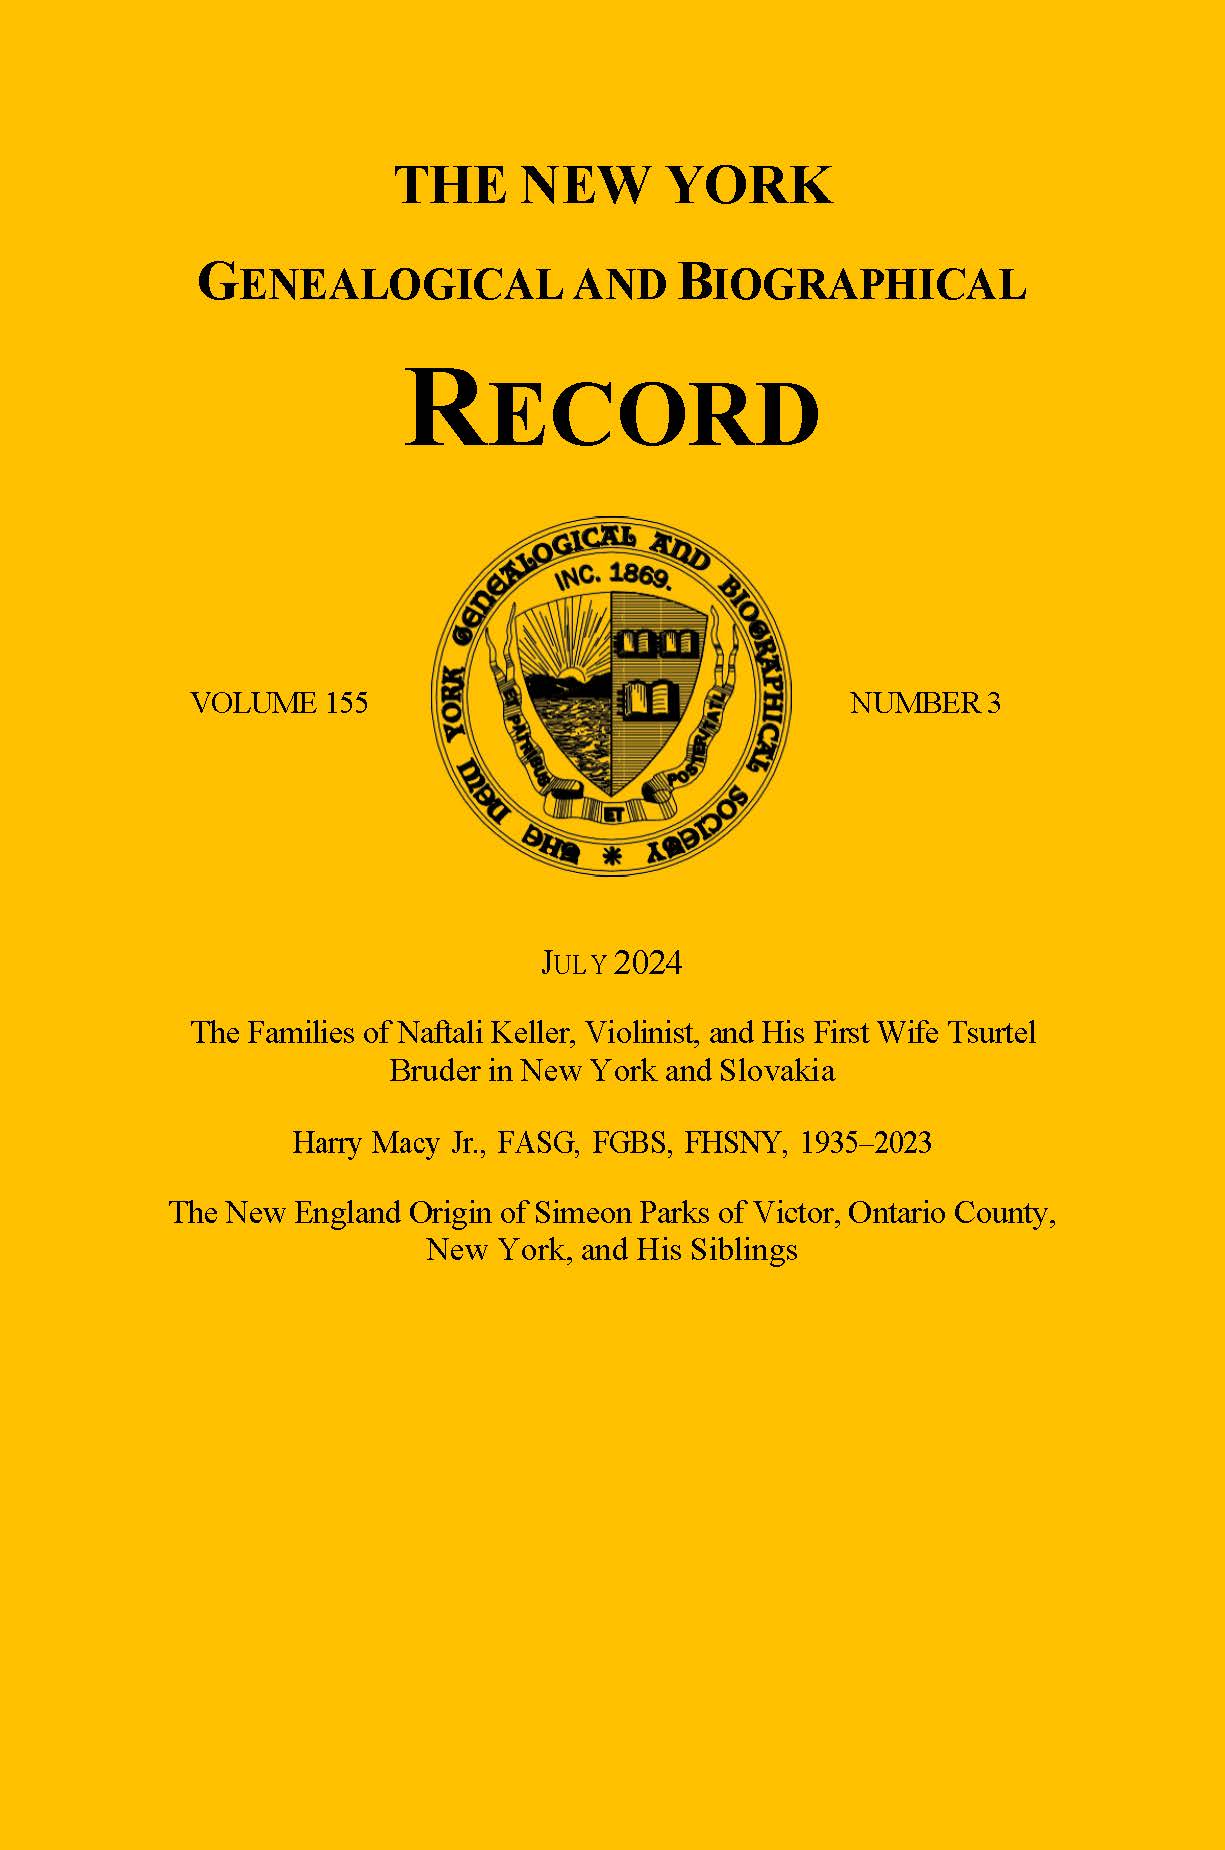 Cover of July 2024 issue of the Record